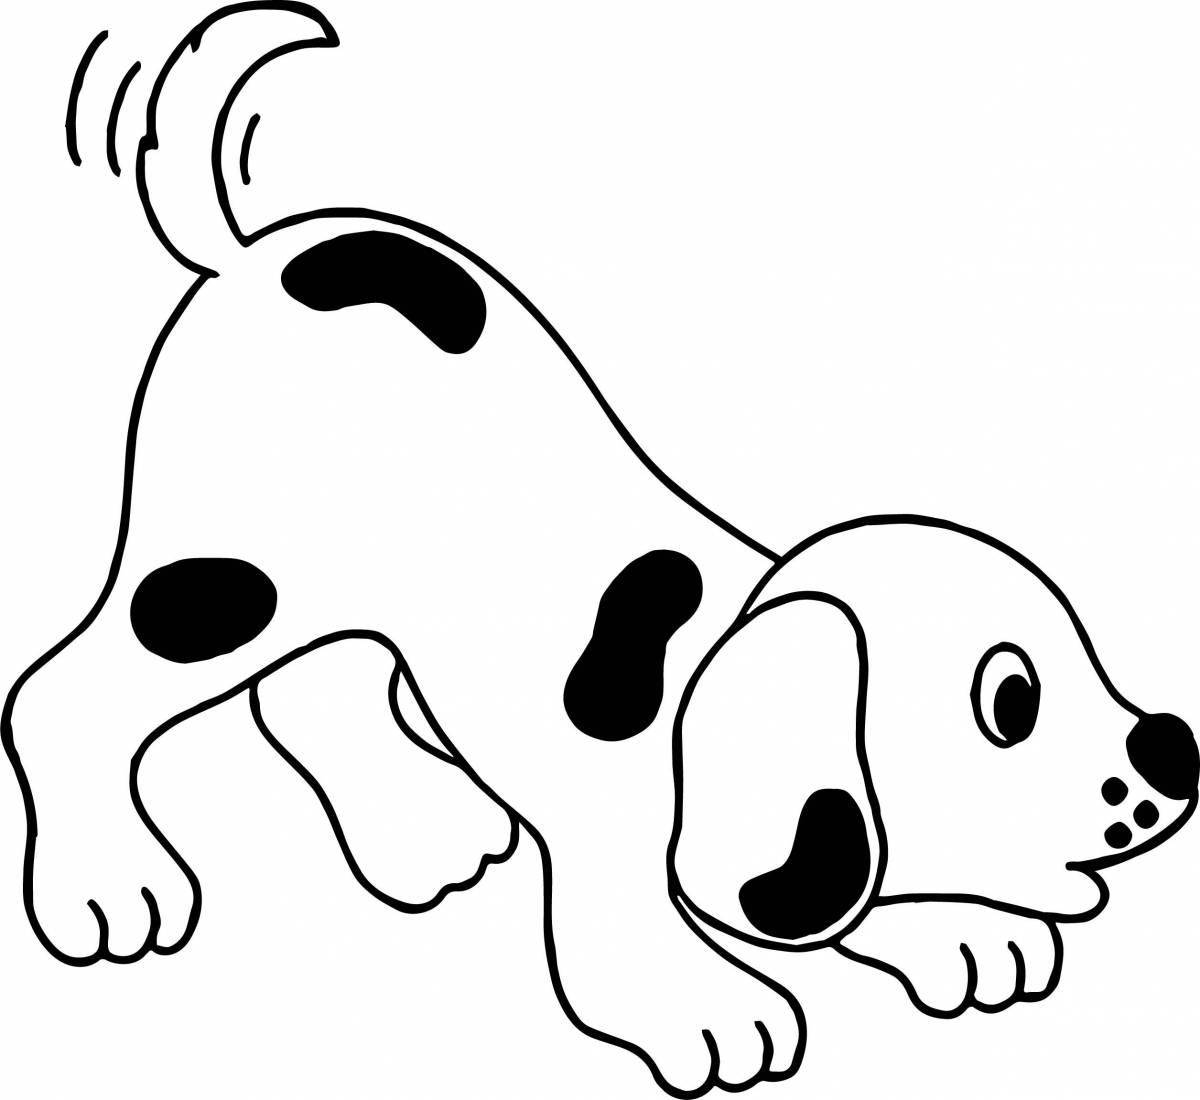 Sweet dog coloring for kids